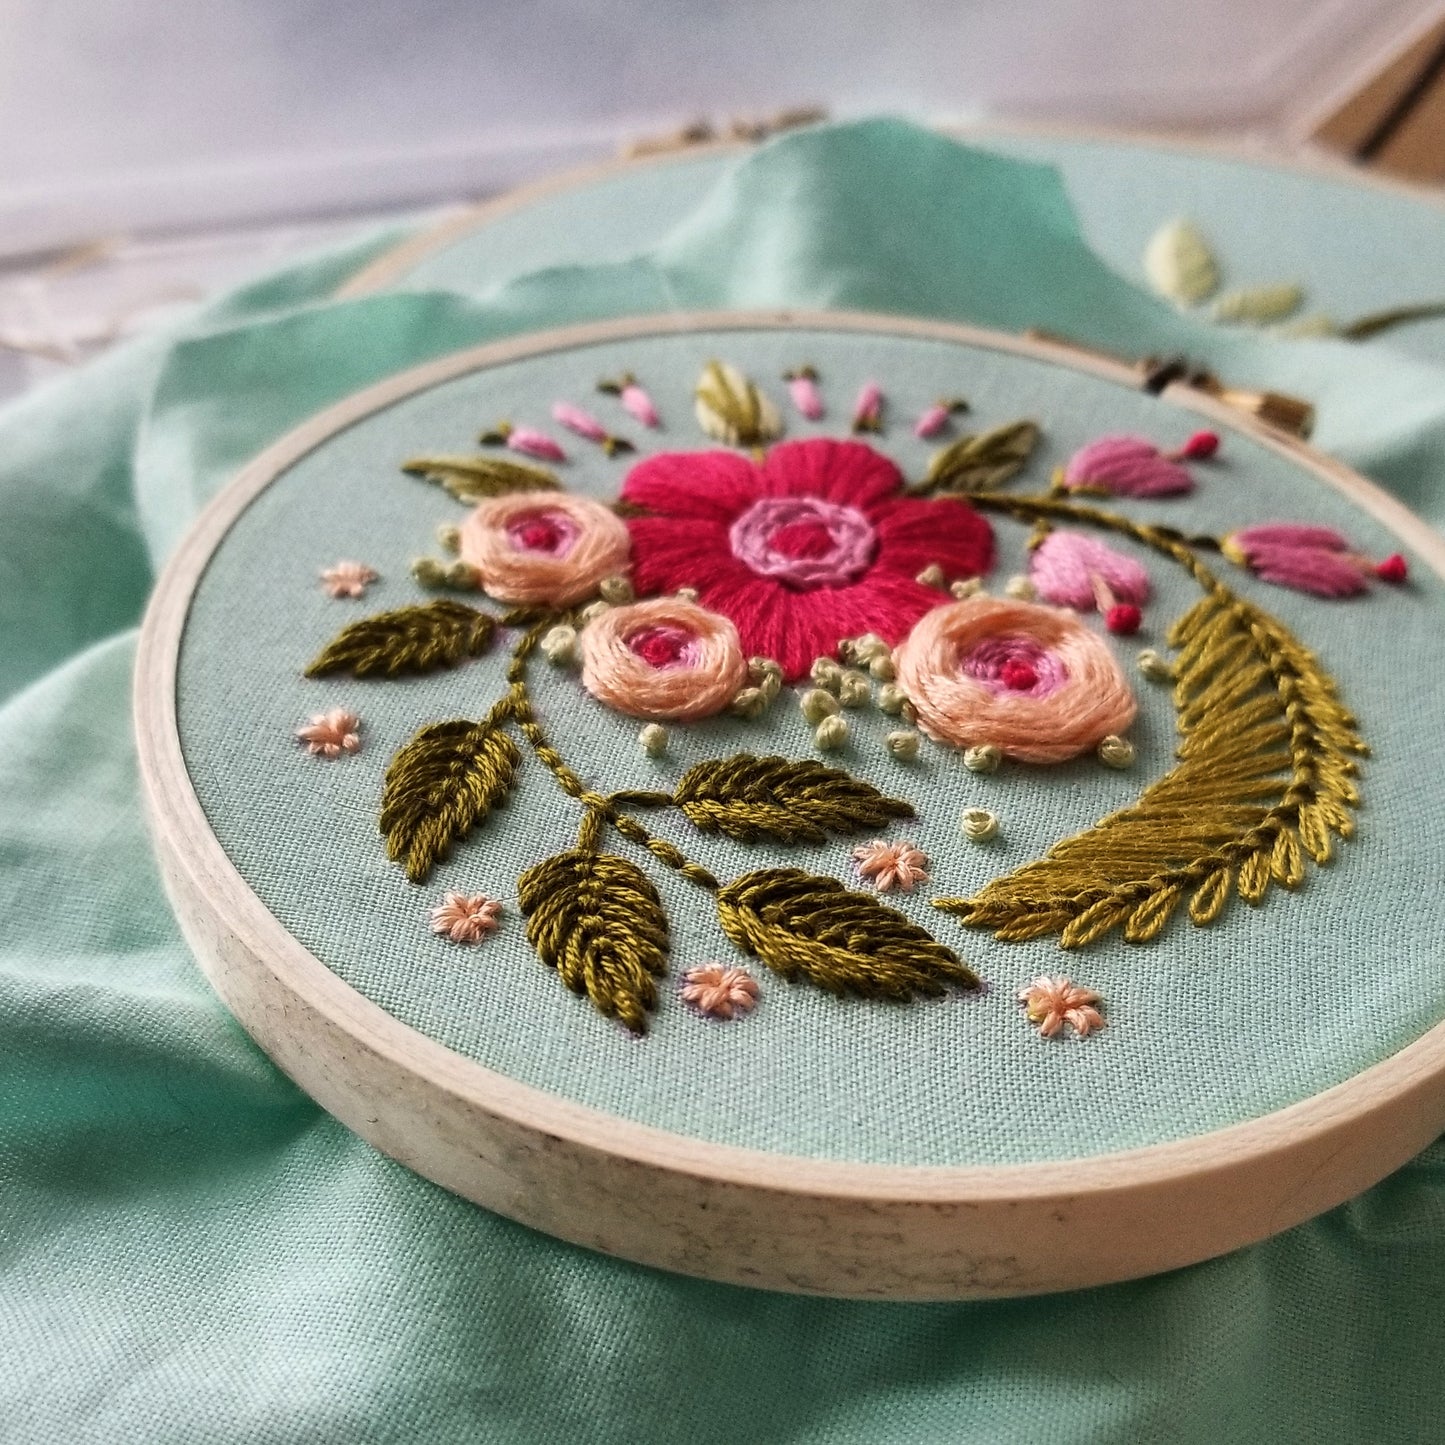 Fresh Blooms Embroidery Pattern (PDF)